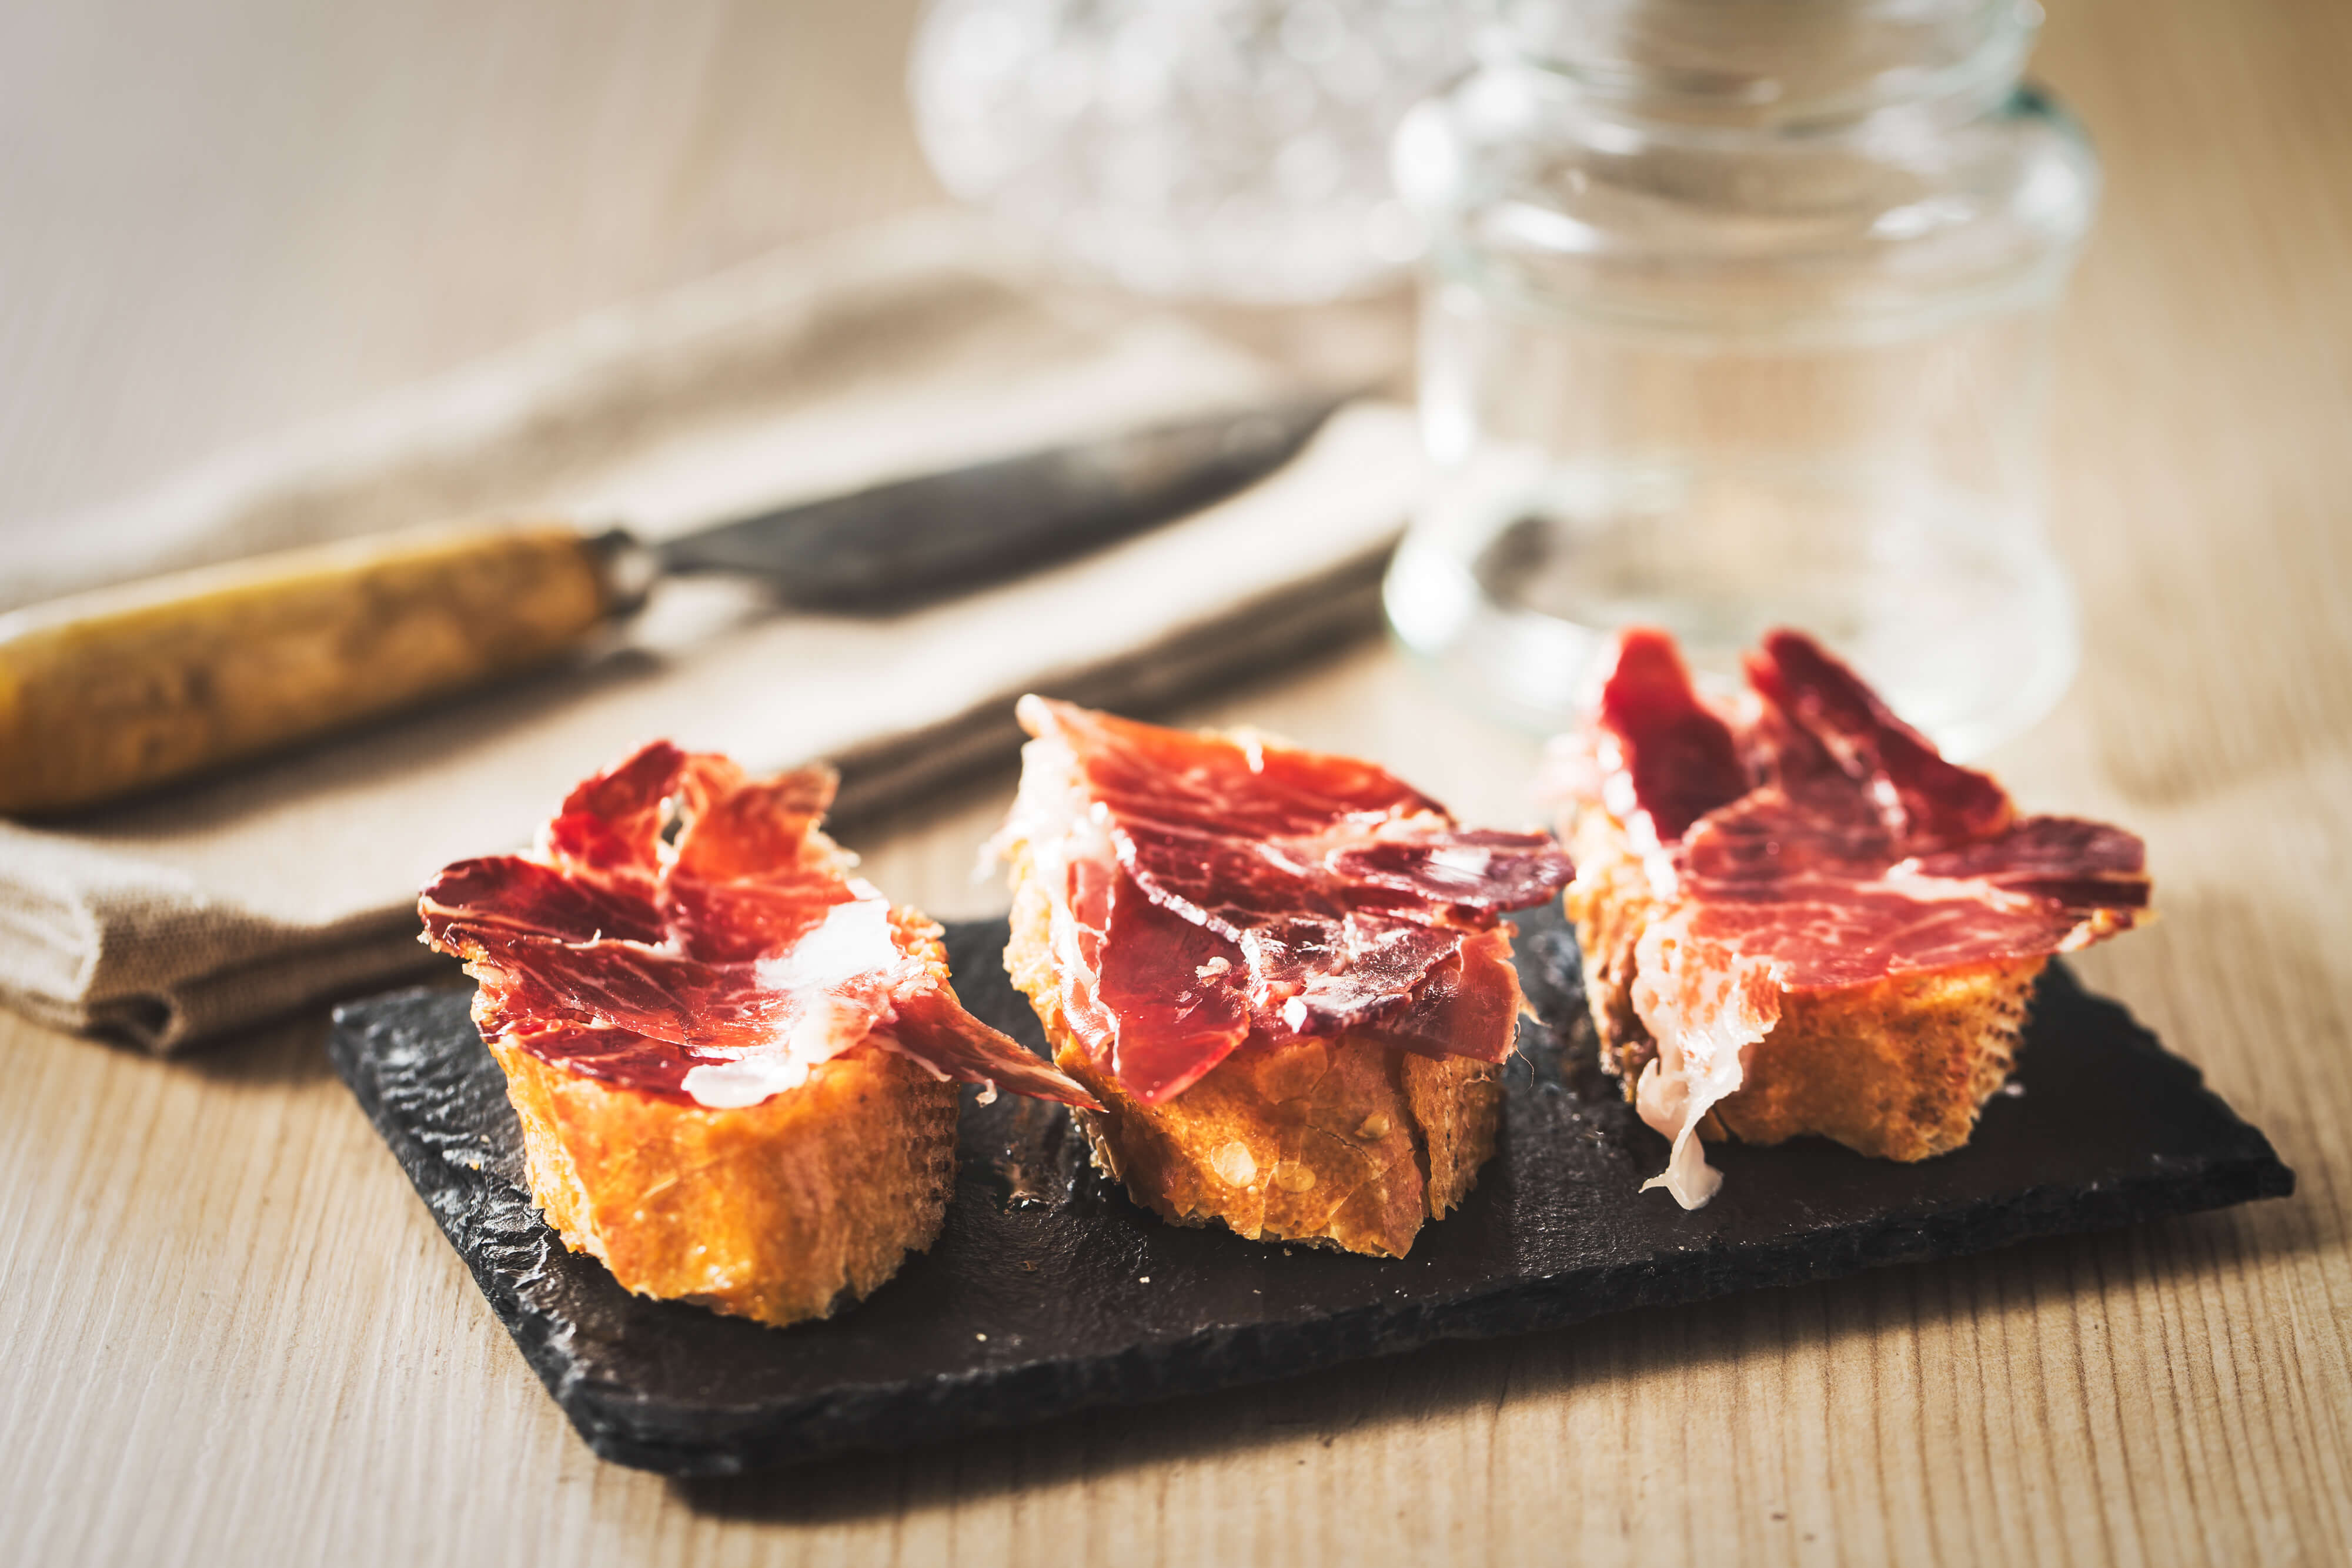 jamon might not be among the healthy tapas recipes in spain